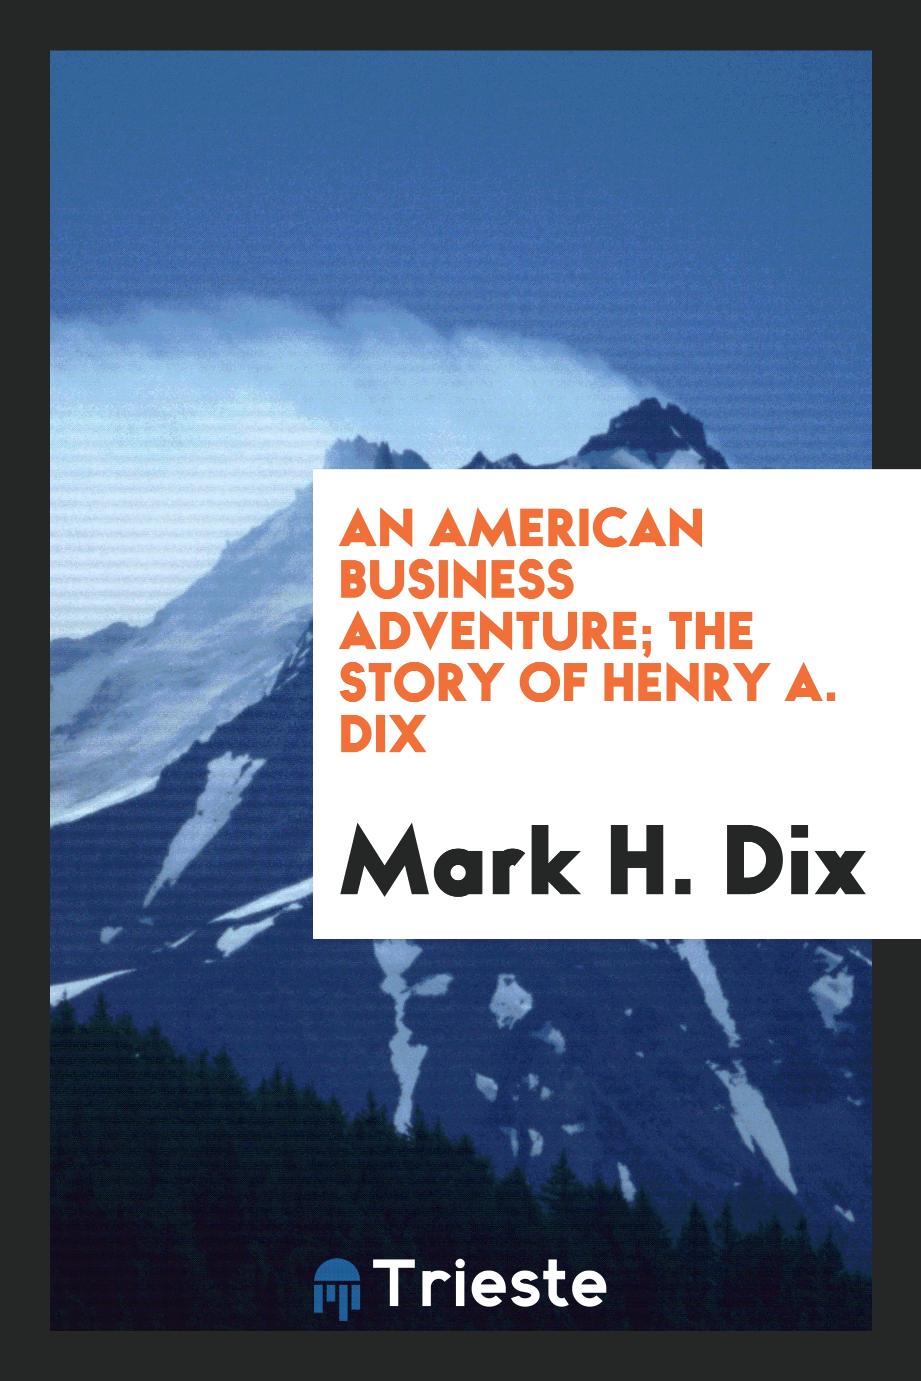 An American business adventure; the story of Henry A. Dix